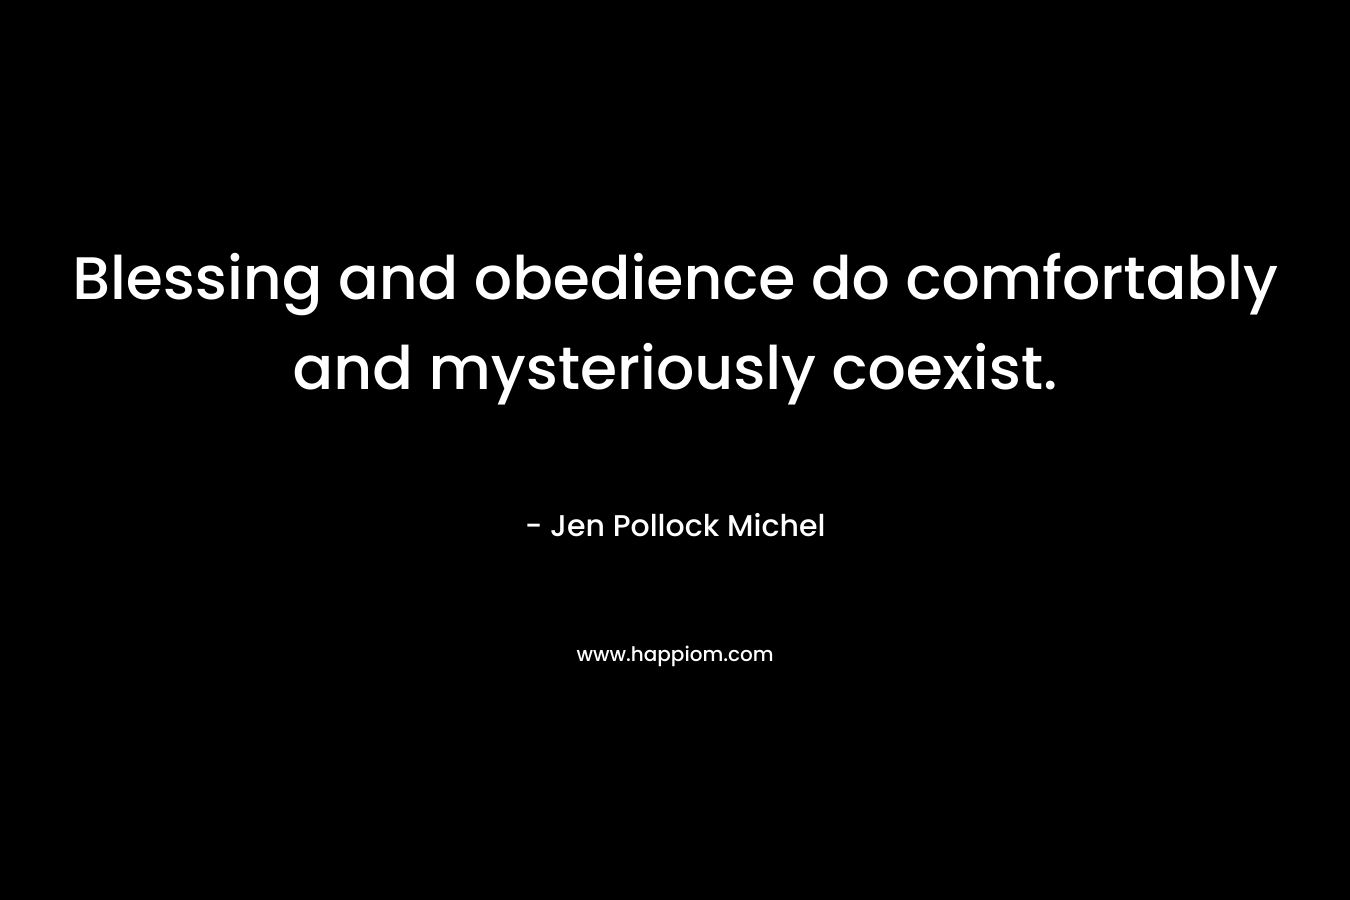 Blessing and obedience do comfortably and mysteriously coexist. – Jen Pollock Michel